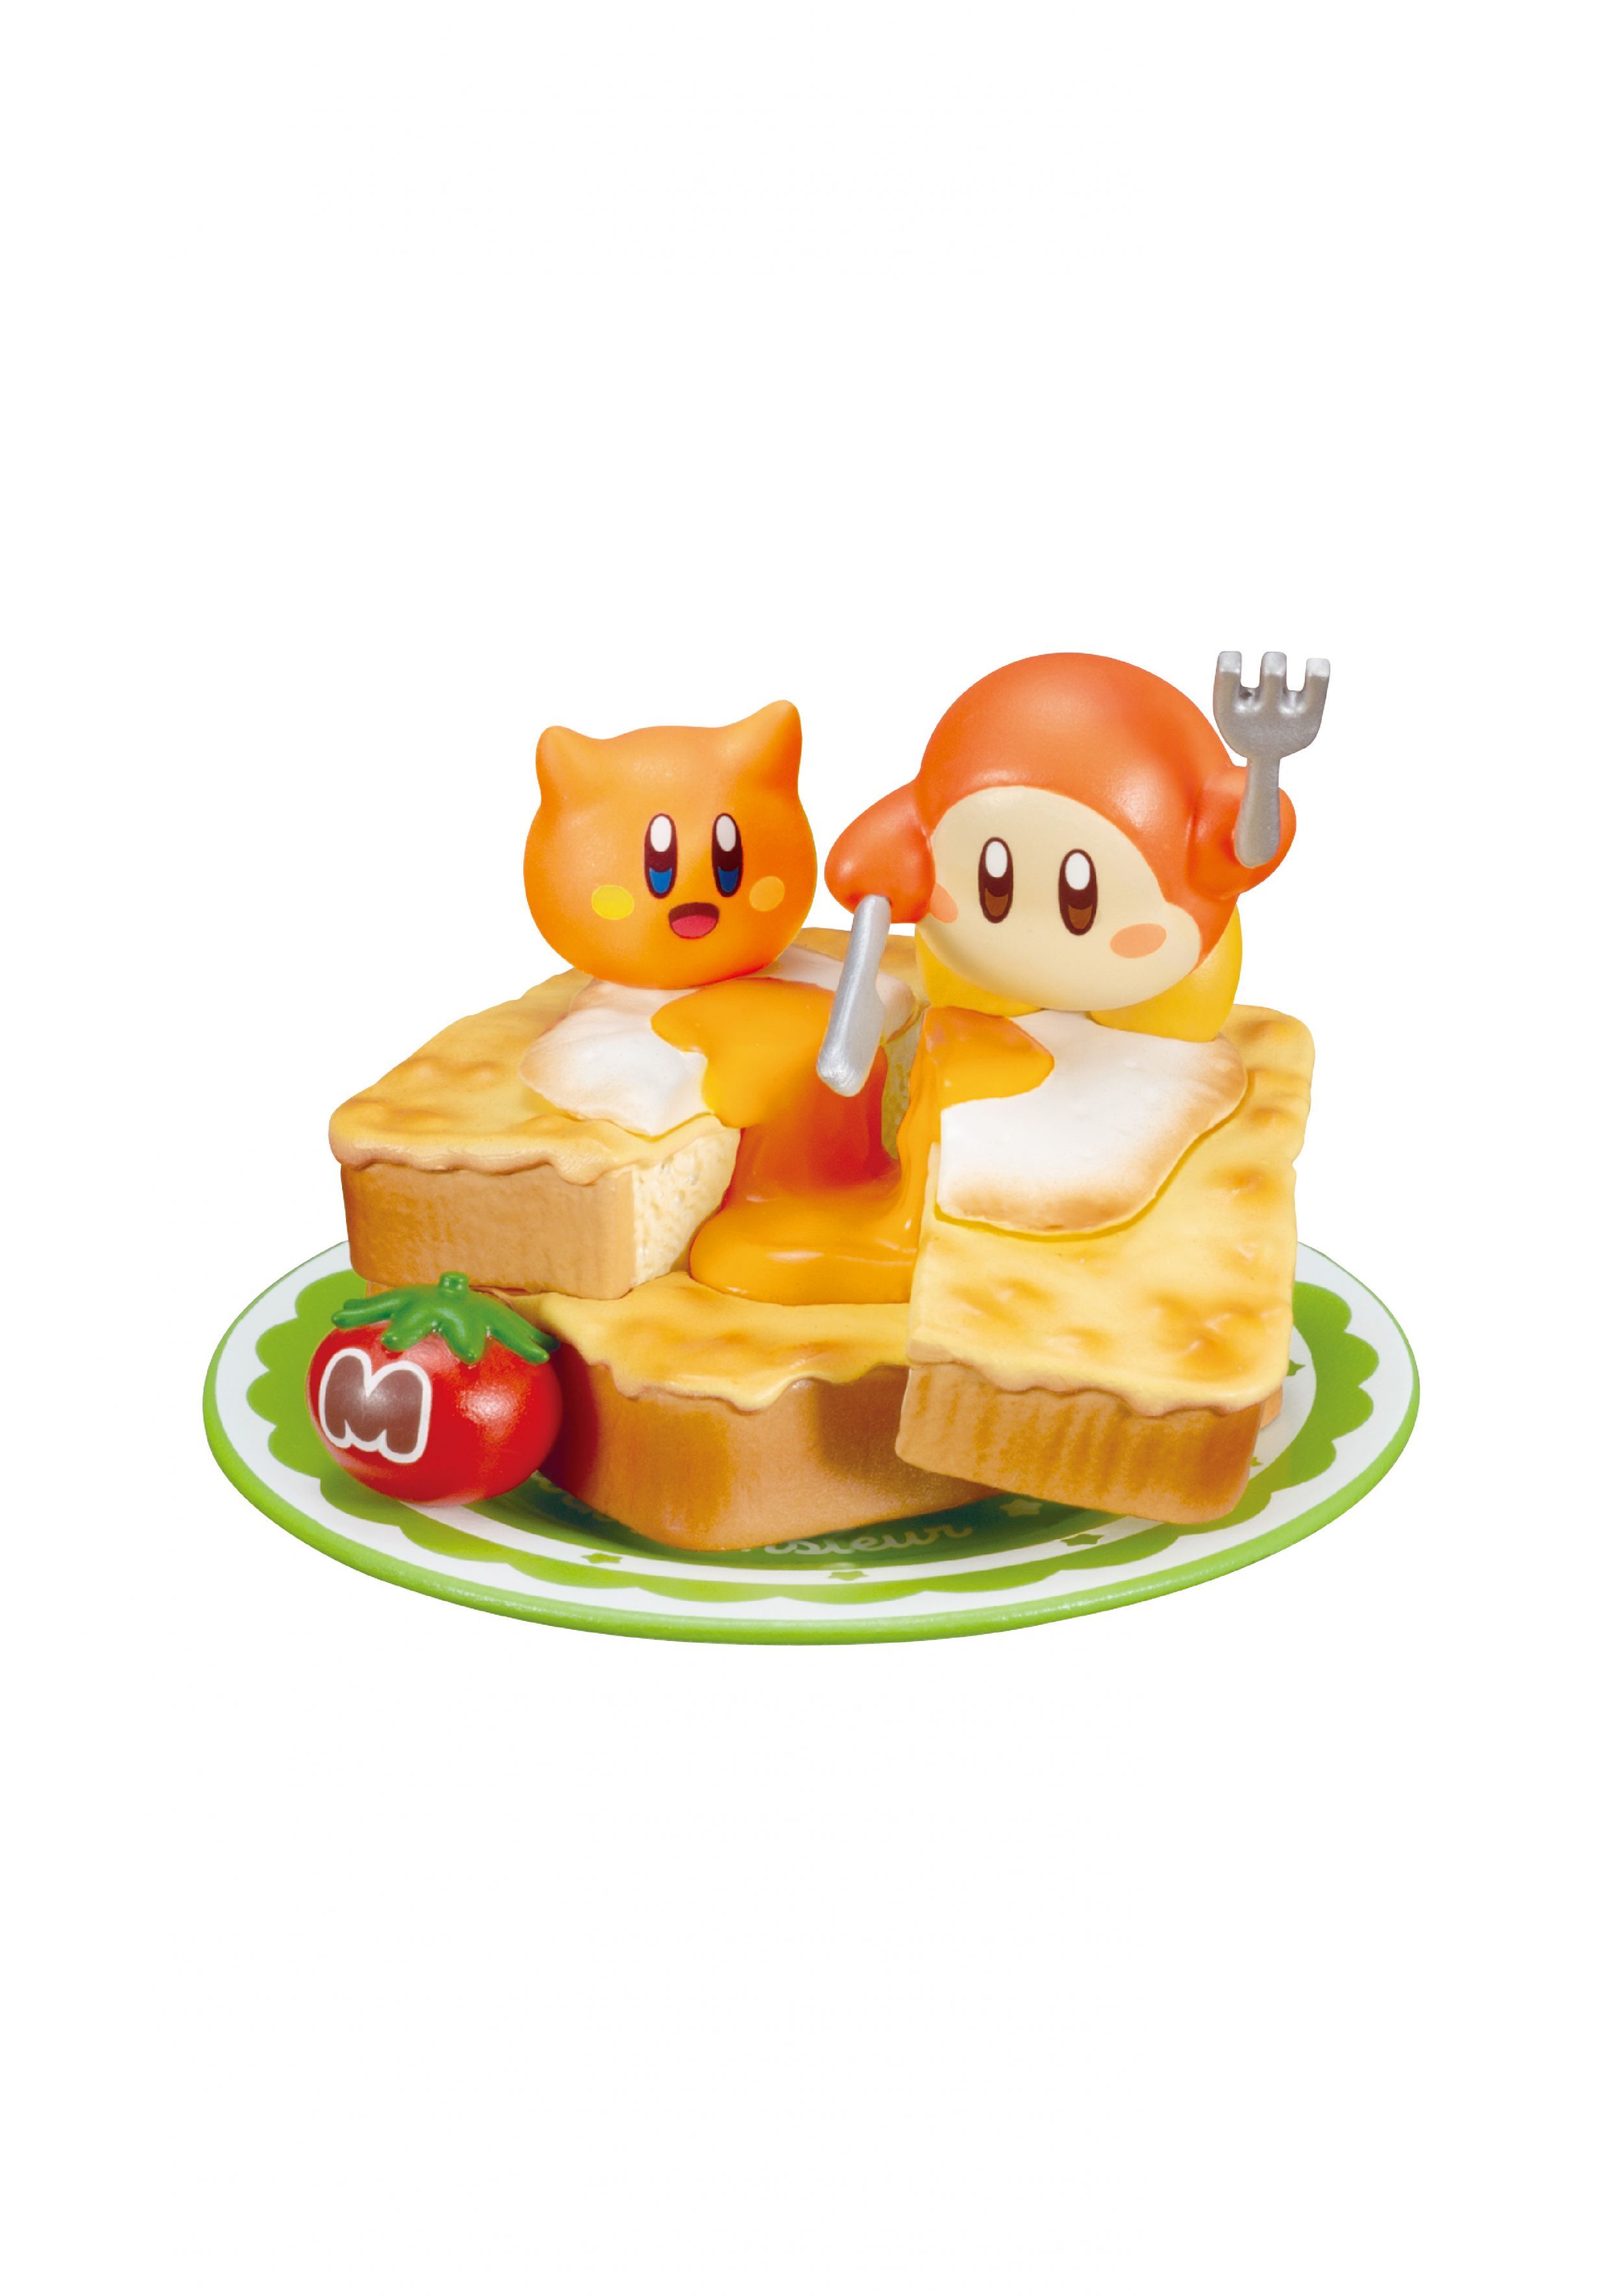 Kirby - Bakery Cafe Blind image count 8